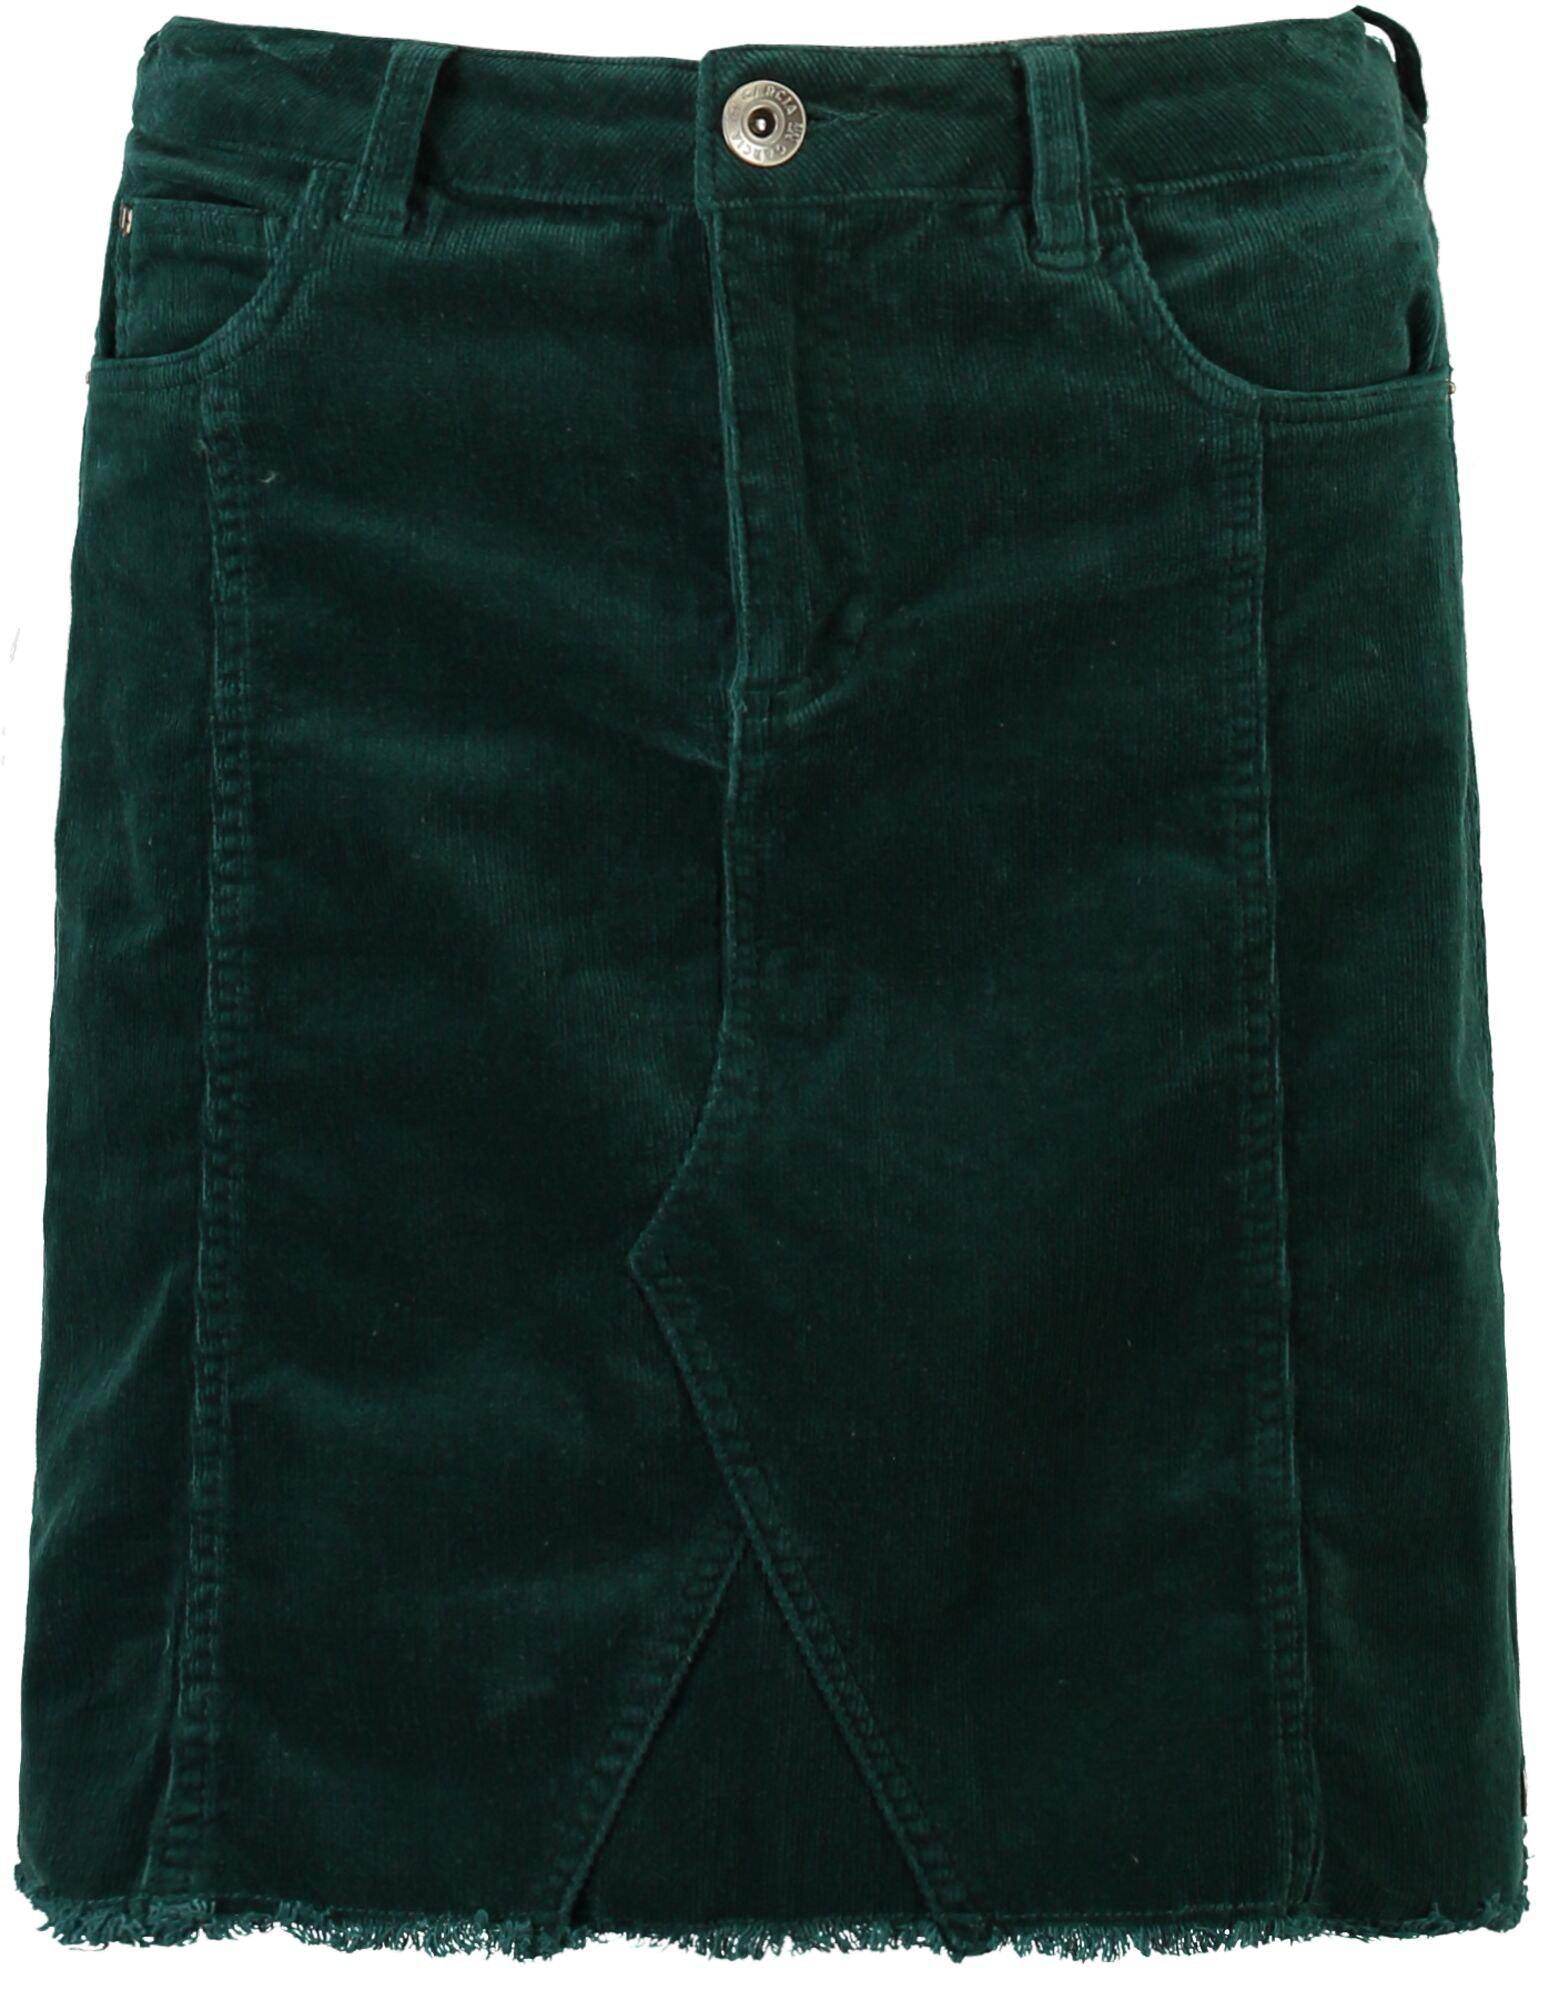 Dark Green Garcia Skirt - Your Style Your Story